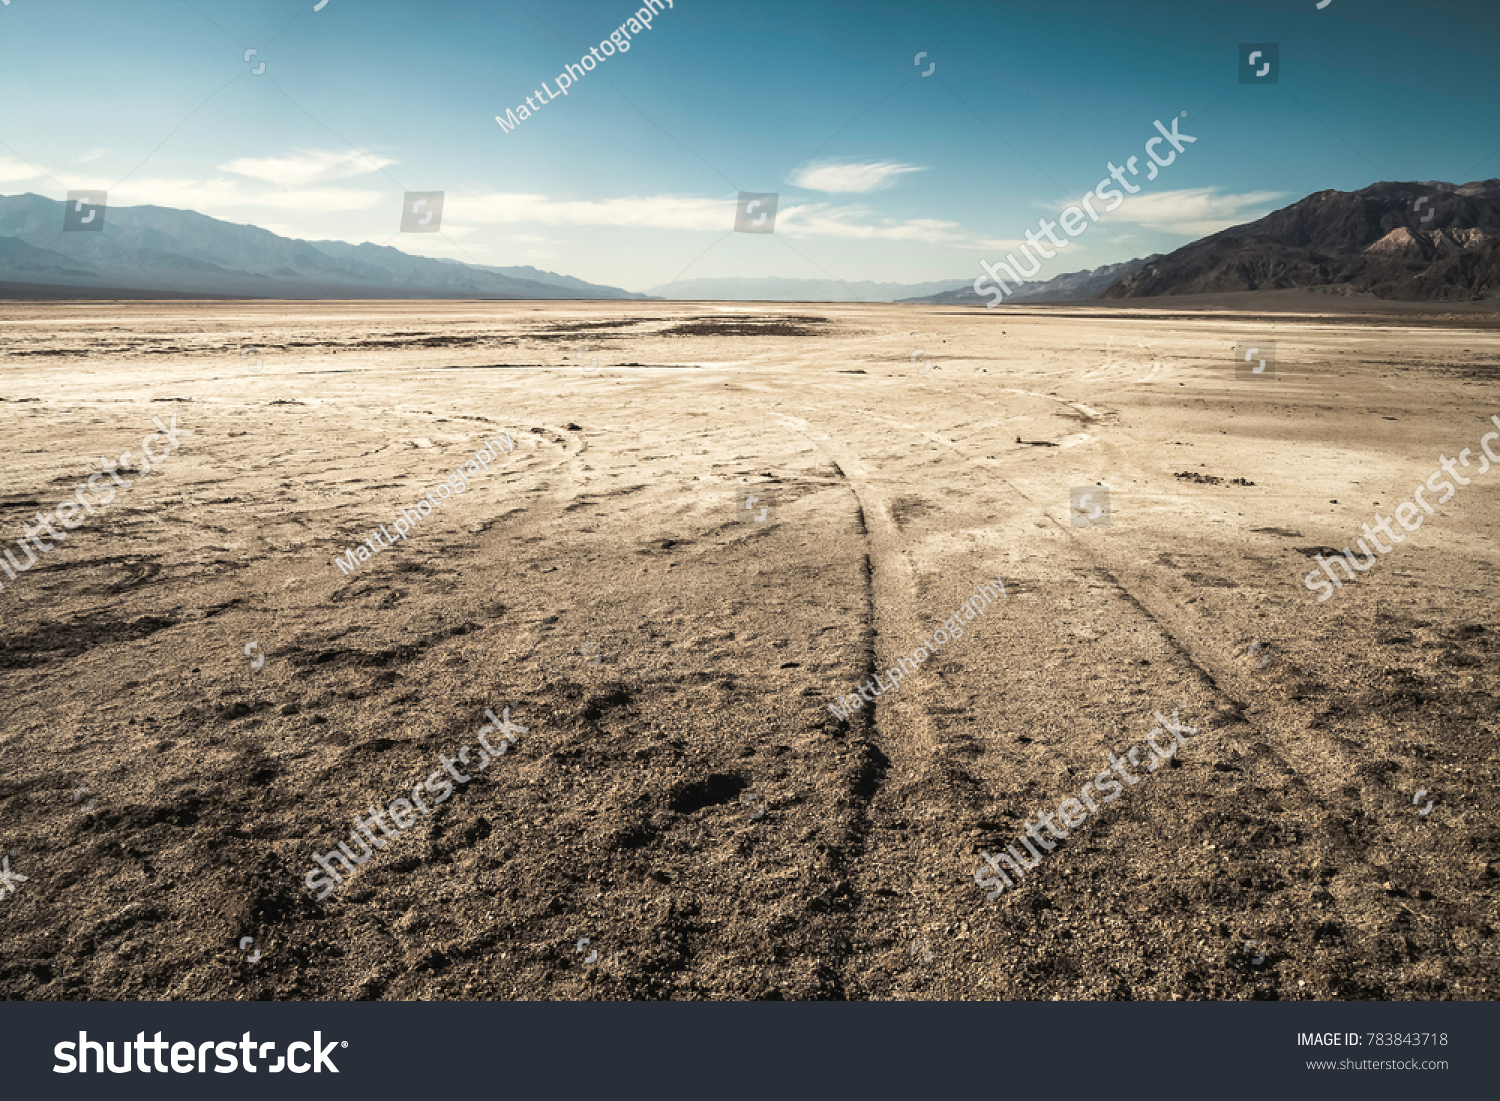 View of a salt desert from badwater basin, Death Valley National Park - California #783843718